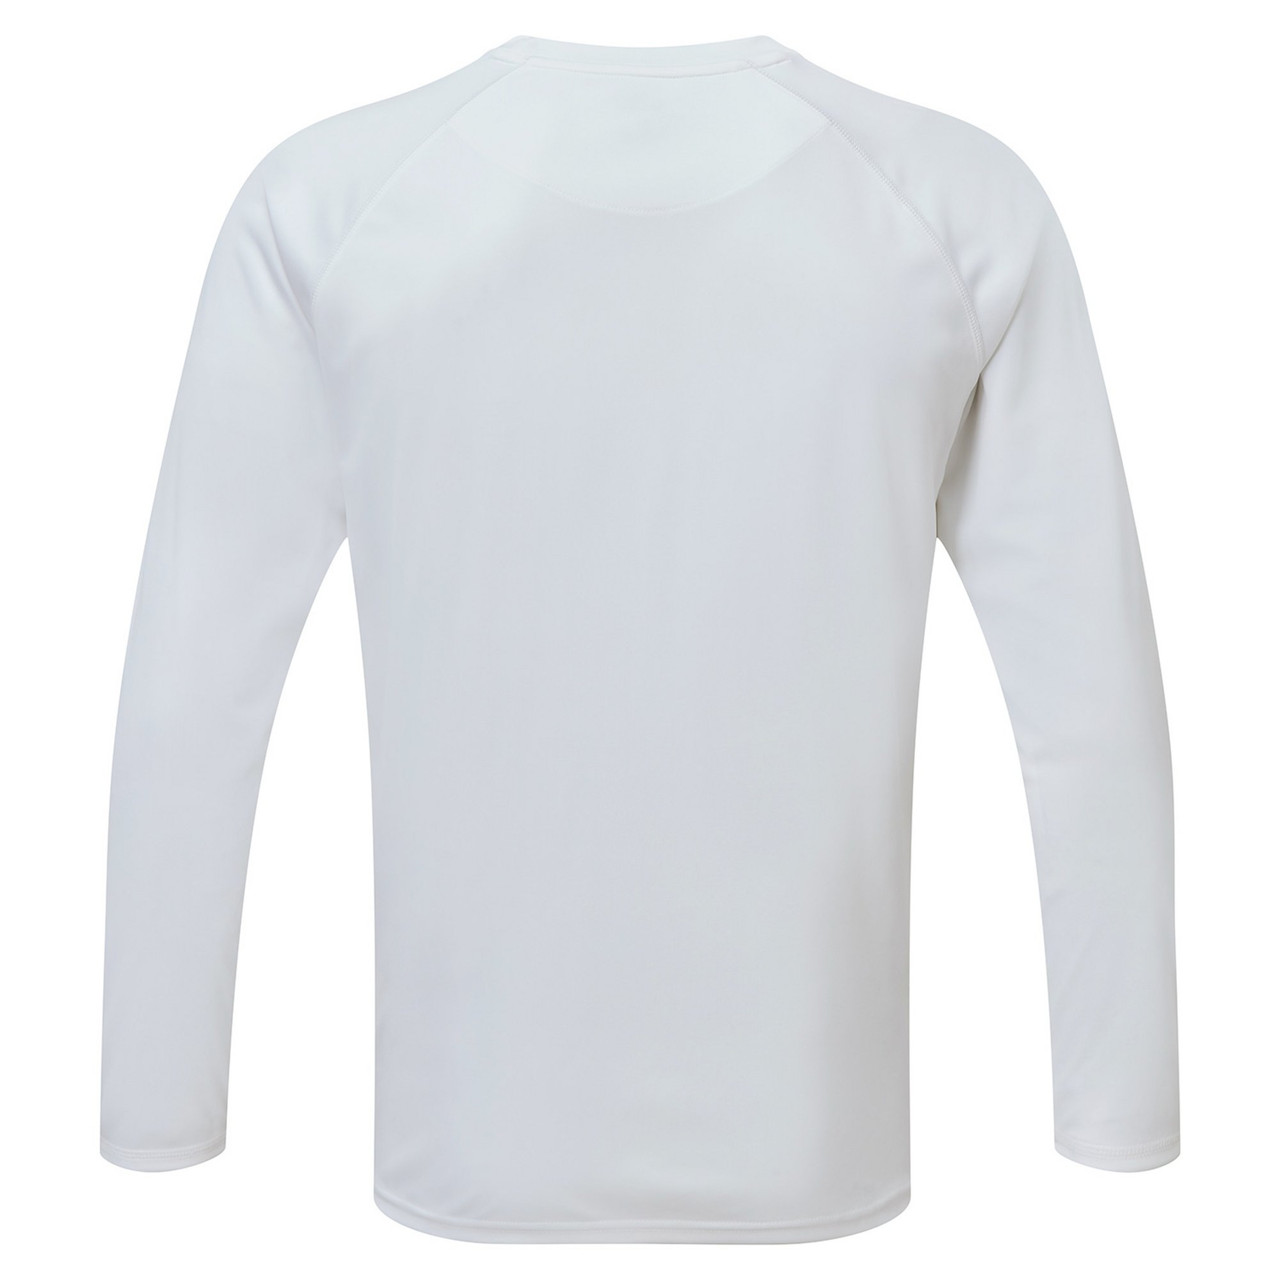 XPEL® Tec Long Sleeve Top in White - Gill Fishing